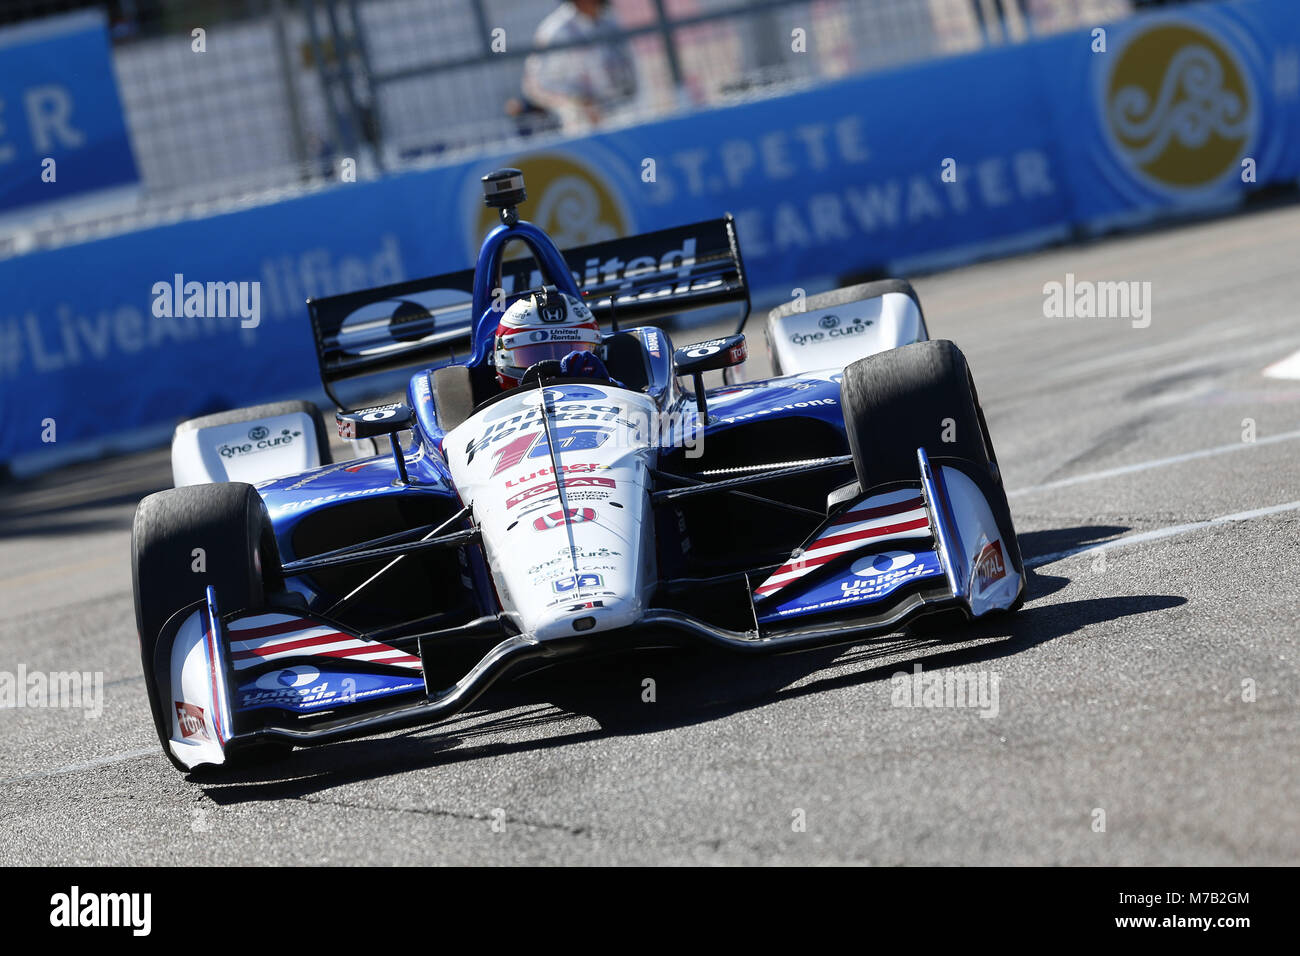 St. Petersburg, Florida, USA. 9th Mar, 2018. March 09, 2018 - St. Petersburg, Florida, USA: Graham Rahal (15) takes to the track to practice for the Firestone Grand Prix of St. Petersburg at Streets of St. Petersburg in St. Petersburg, Florida. Credit: Justin R. Noe Asp Inc/ASP/ZUMA Wire/Alamy Live News Stock Photo